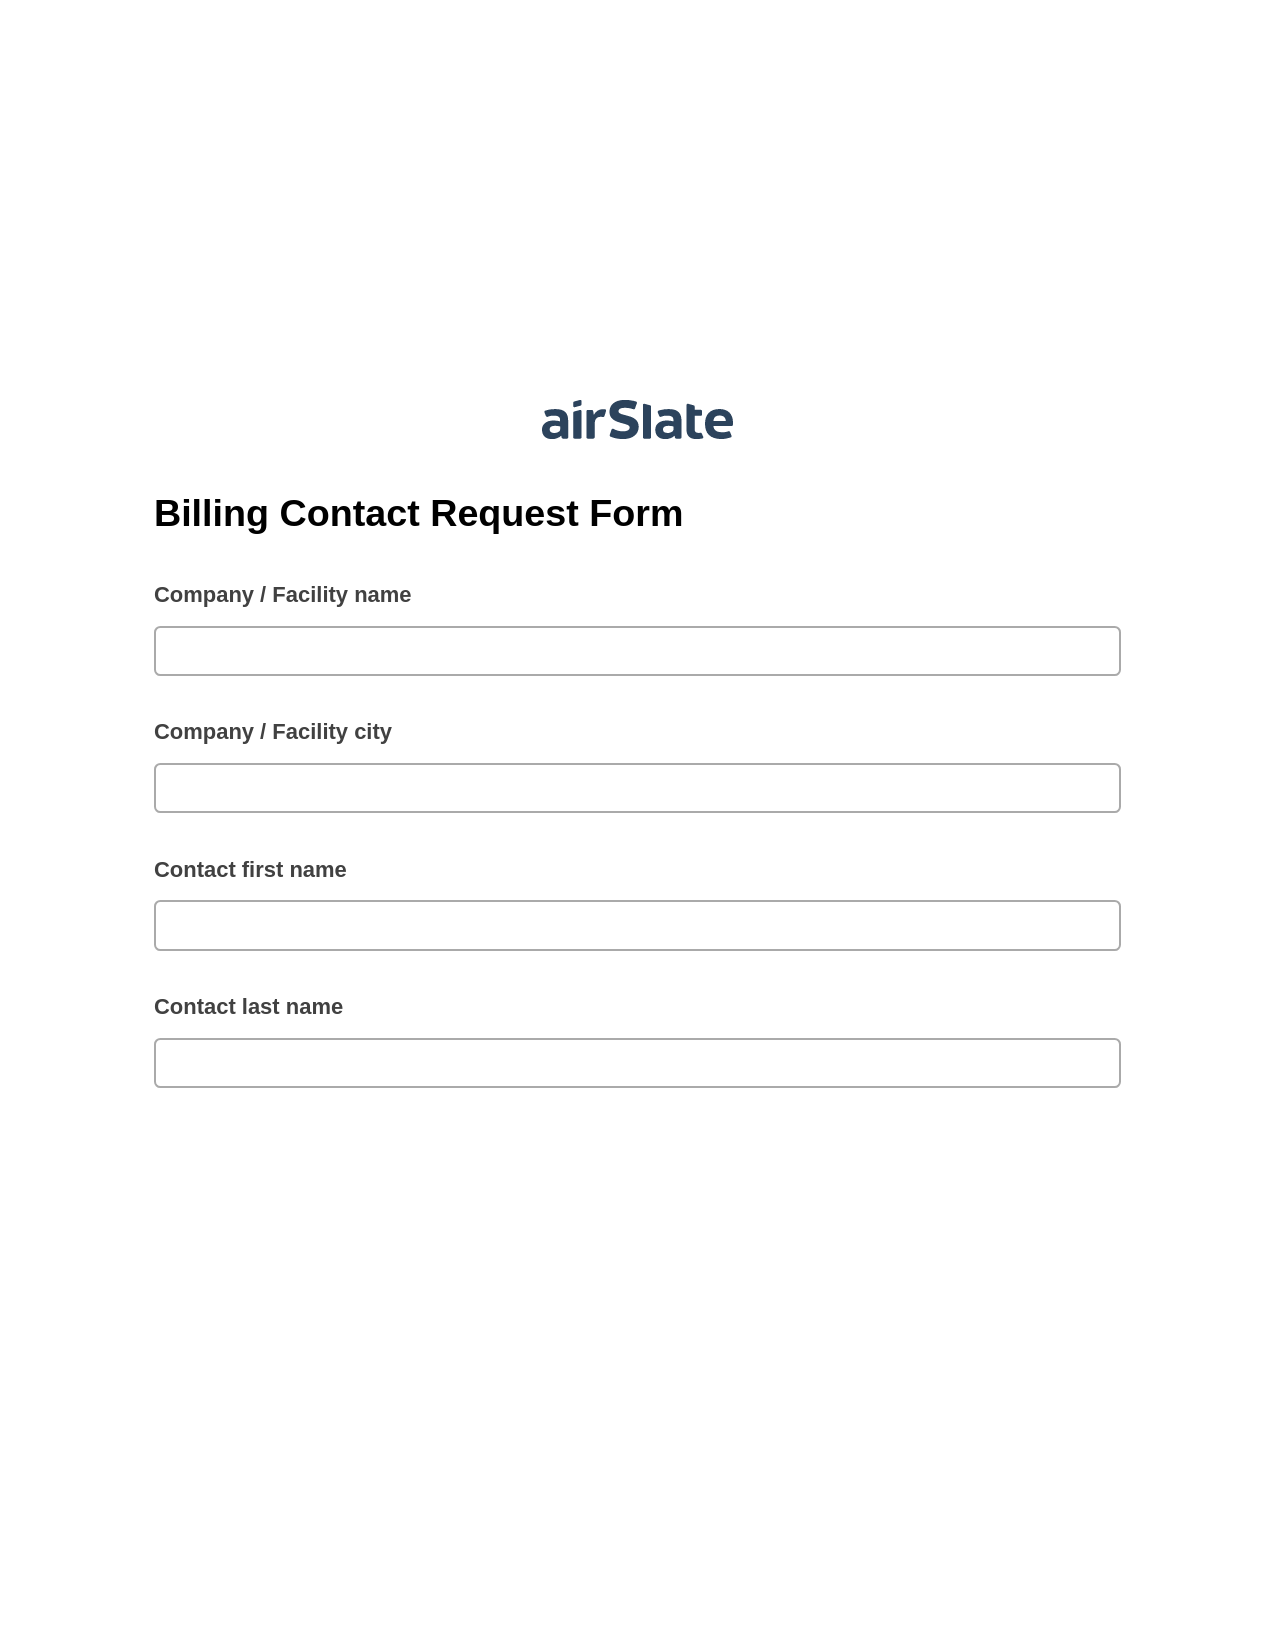 Multirole Billing Contact Request Form Pre-fill from CSV File Bot, Update NetSuite Records Bot, Export to Formstack Documents Bot